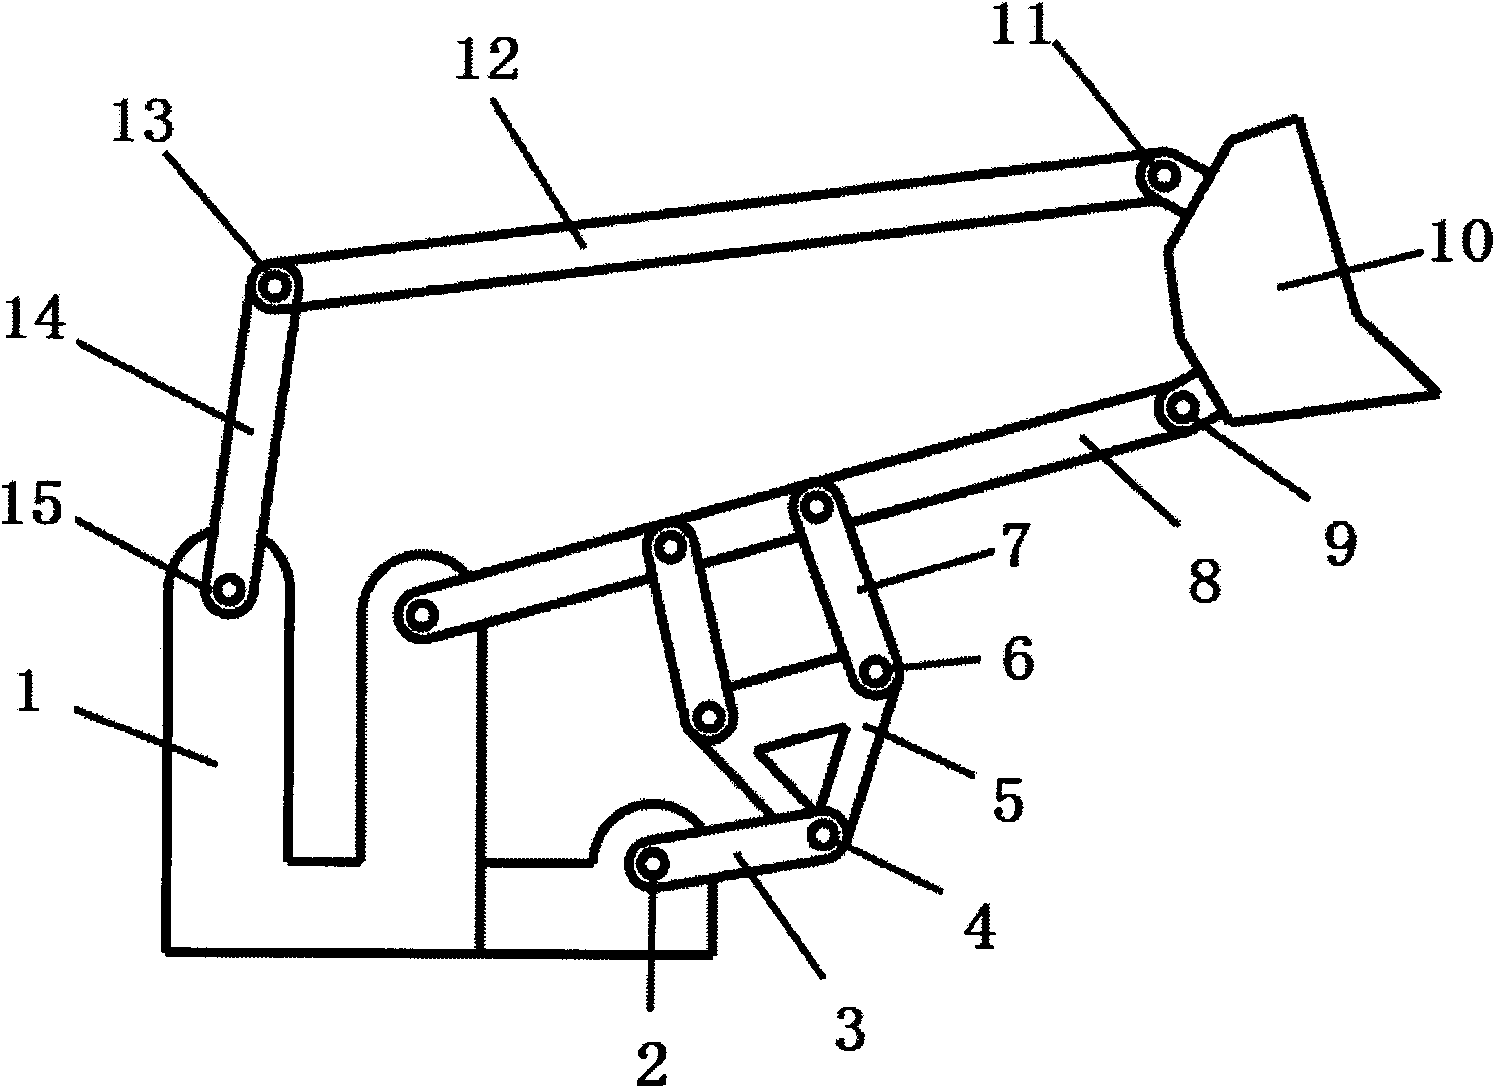 High-rigidity nine-lever and two-freedom degree controllable mechanical loading mechanism